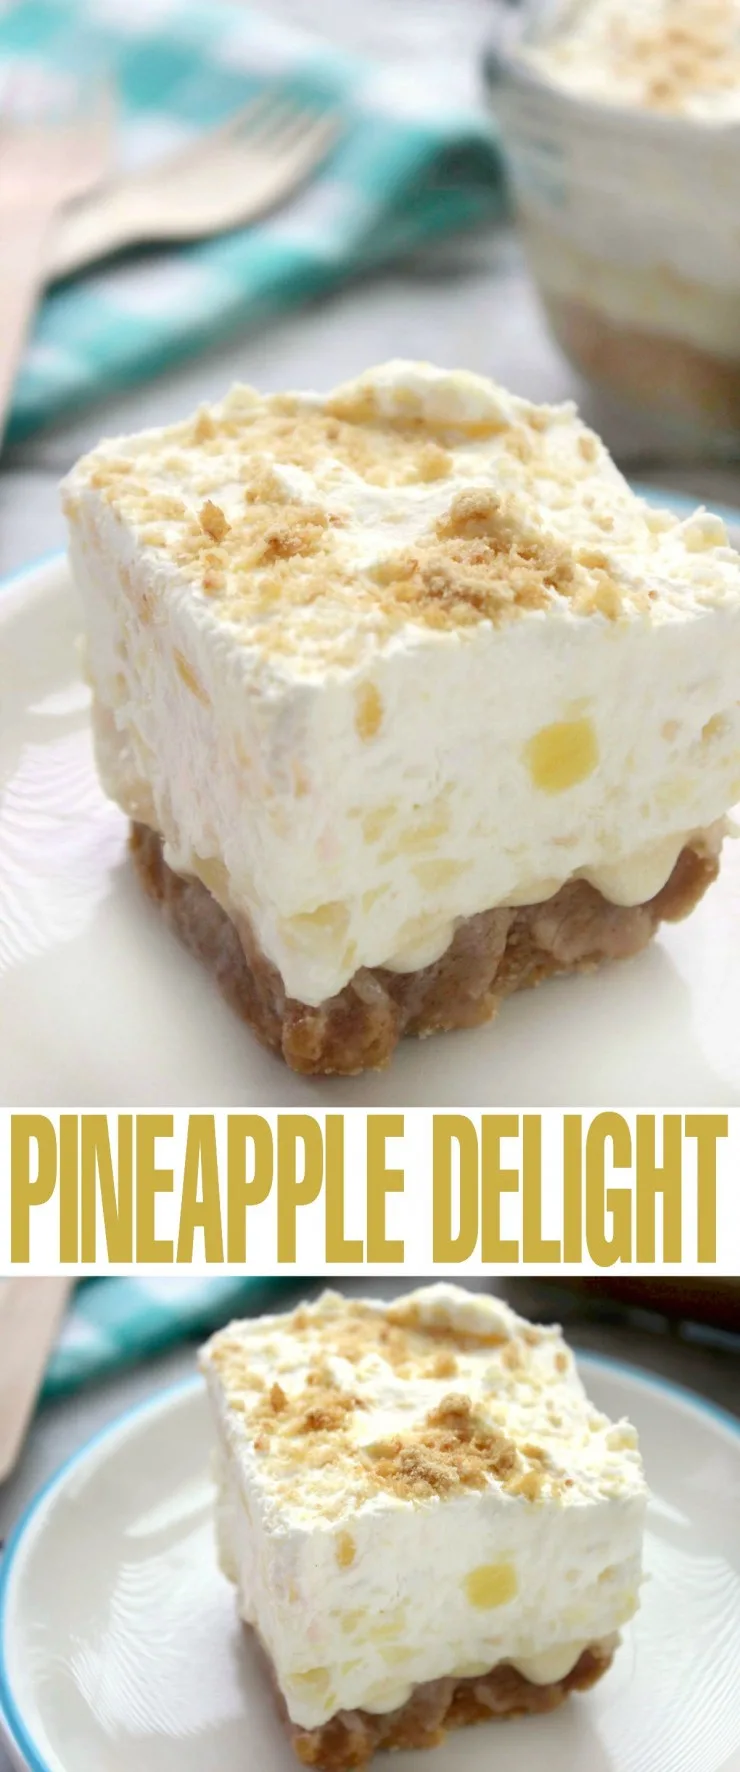 Pineapple Delight is a luscious summer dessert perfect for serving guests!